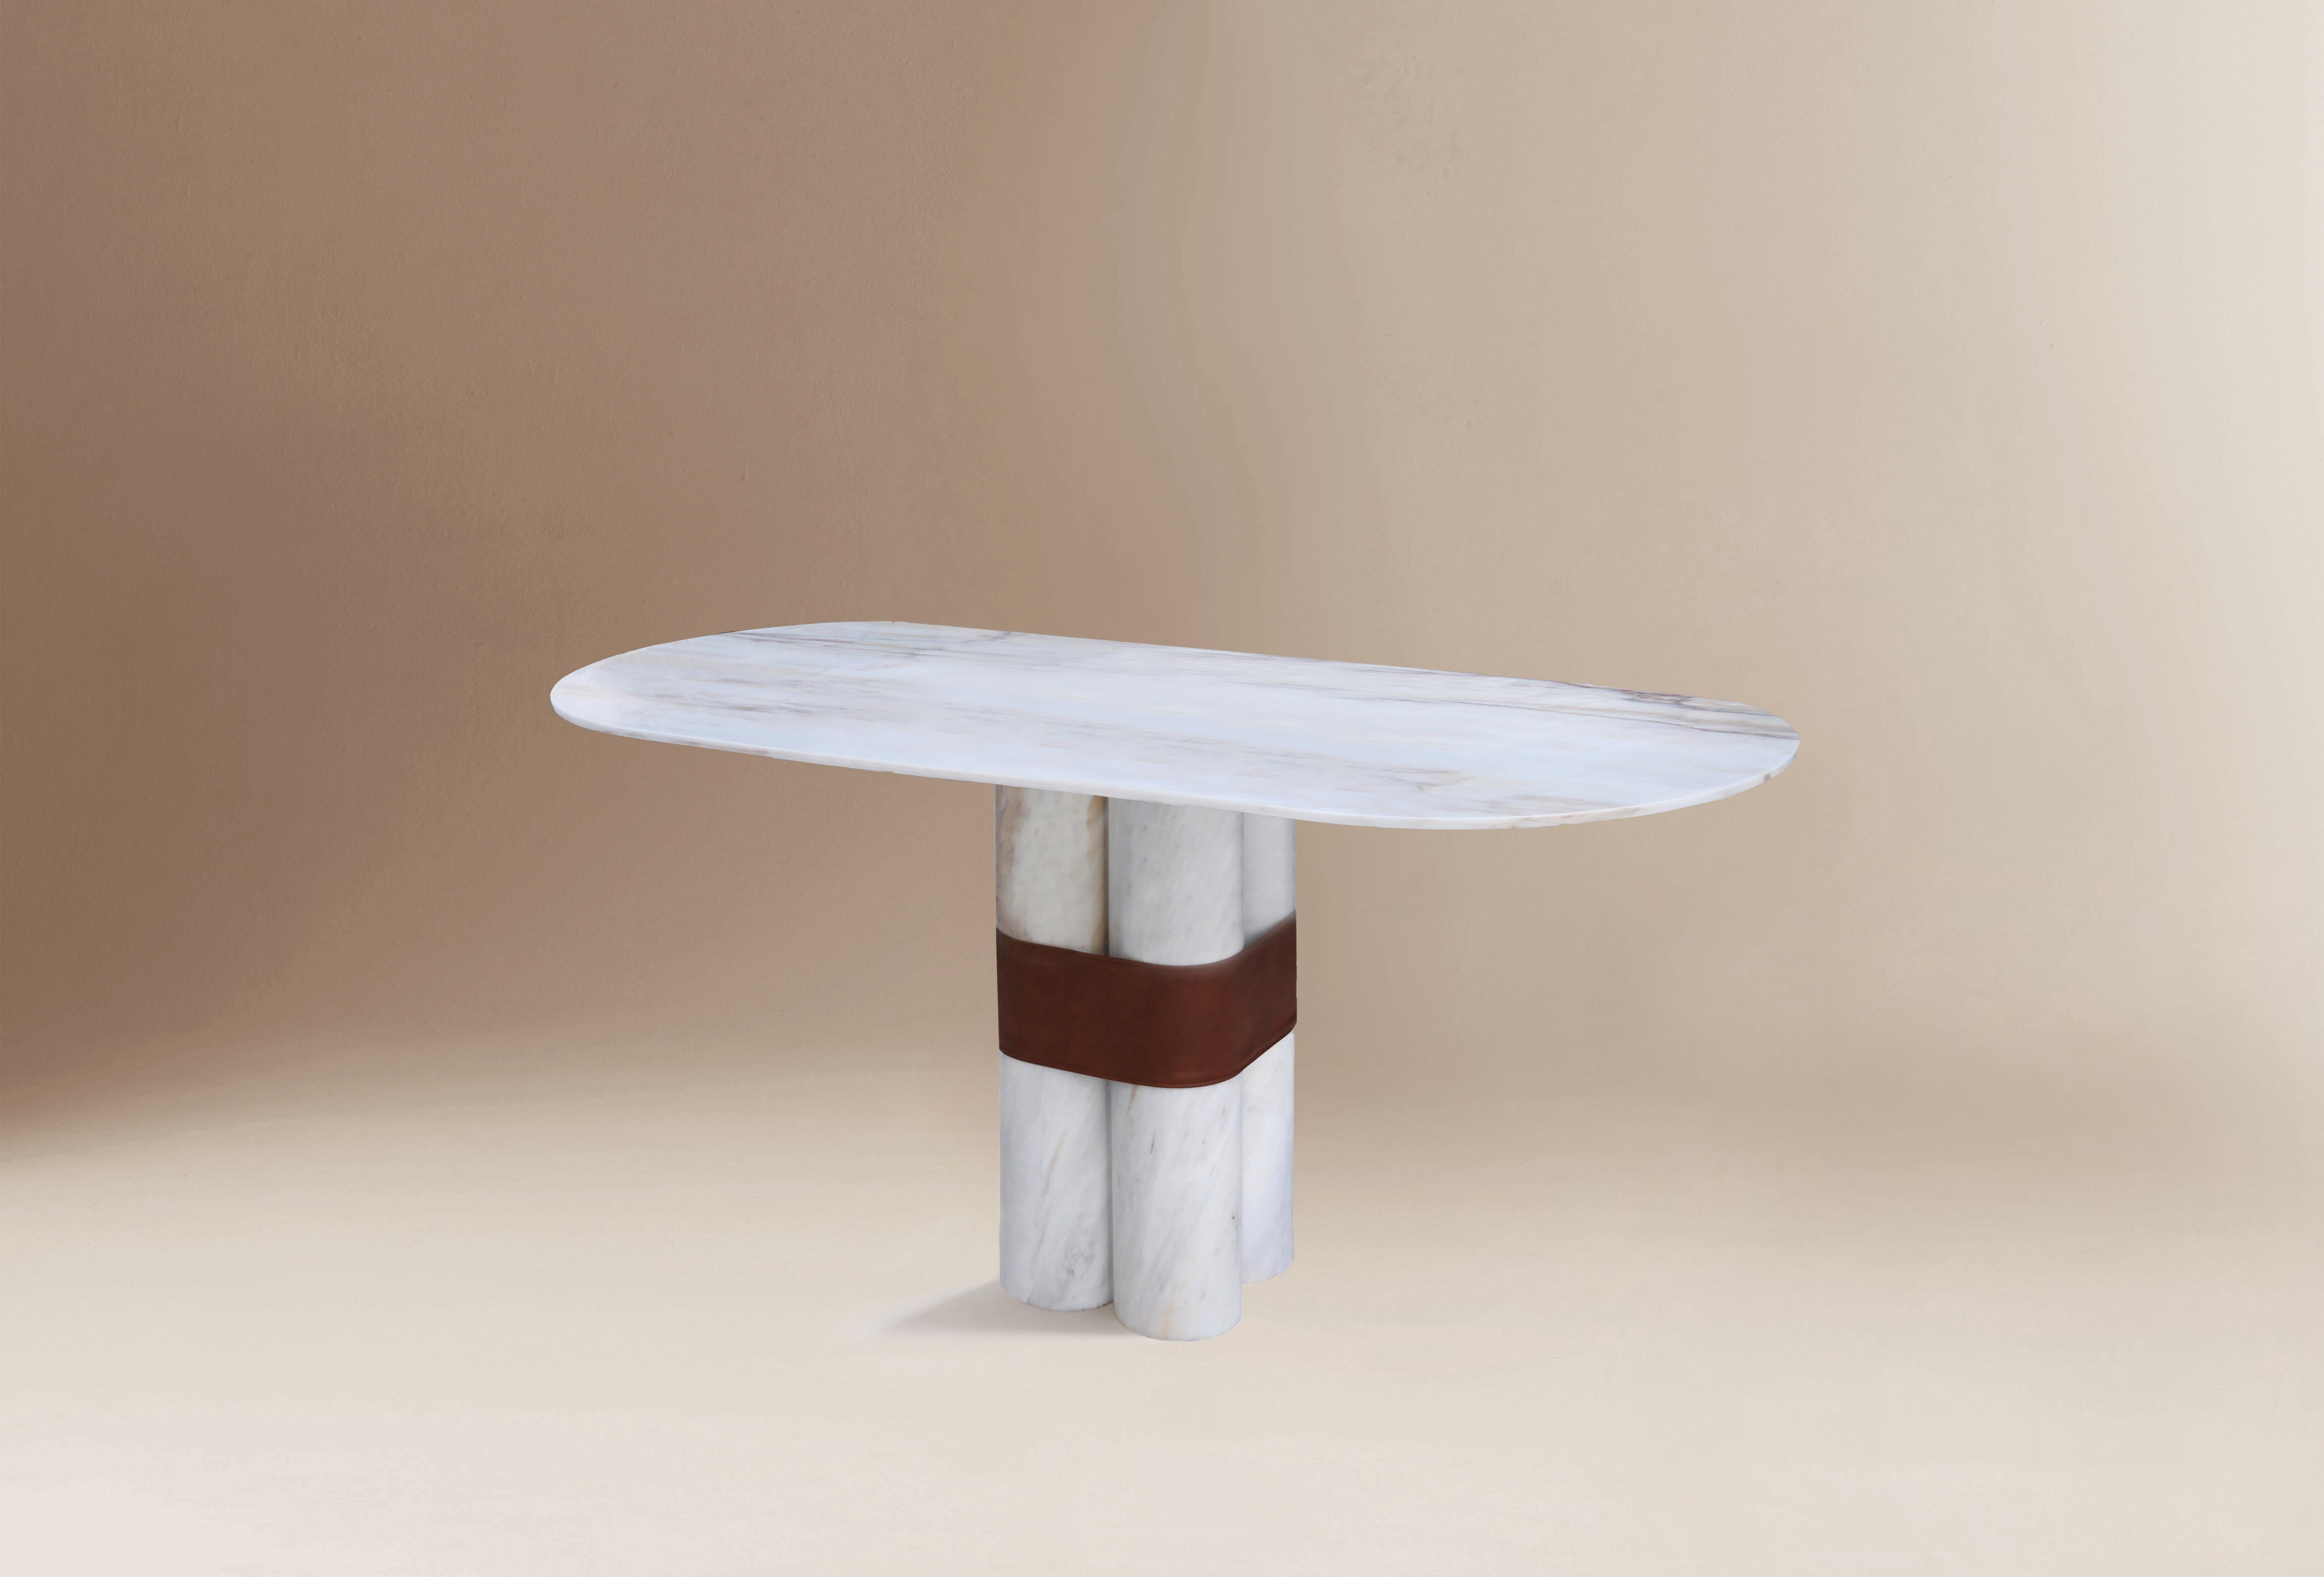 Post-Modern Axis Round Table by Dovain Studio